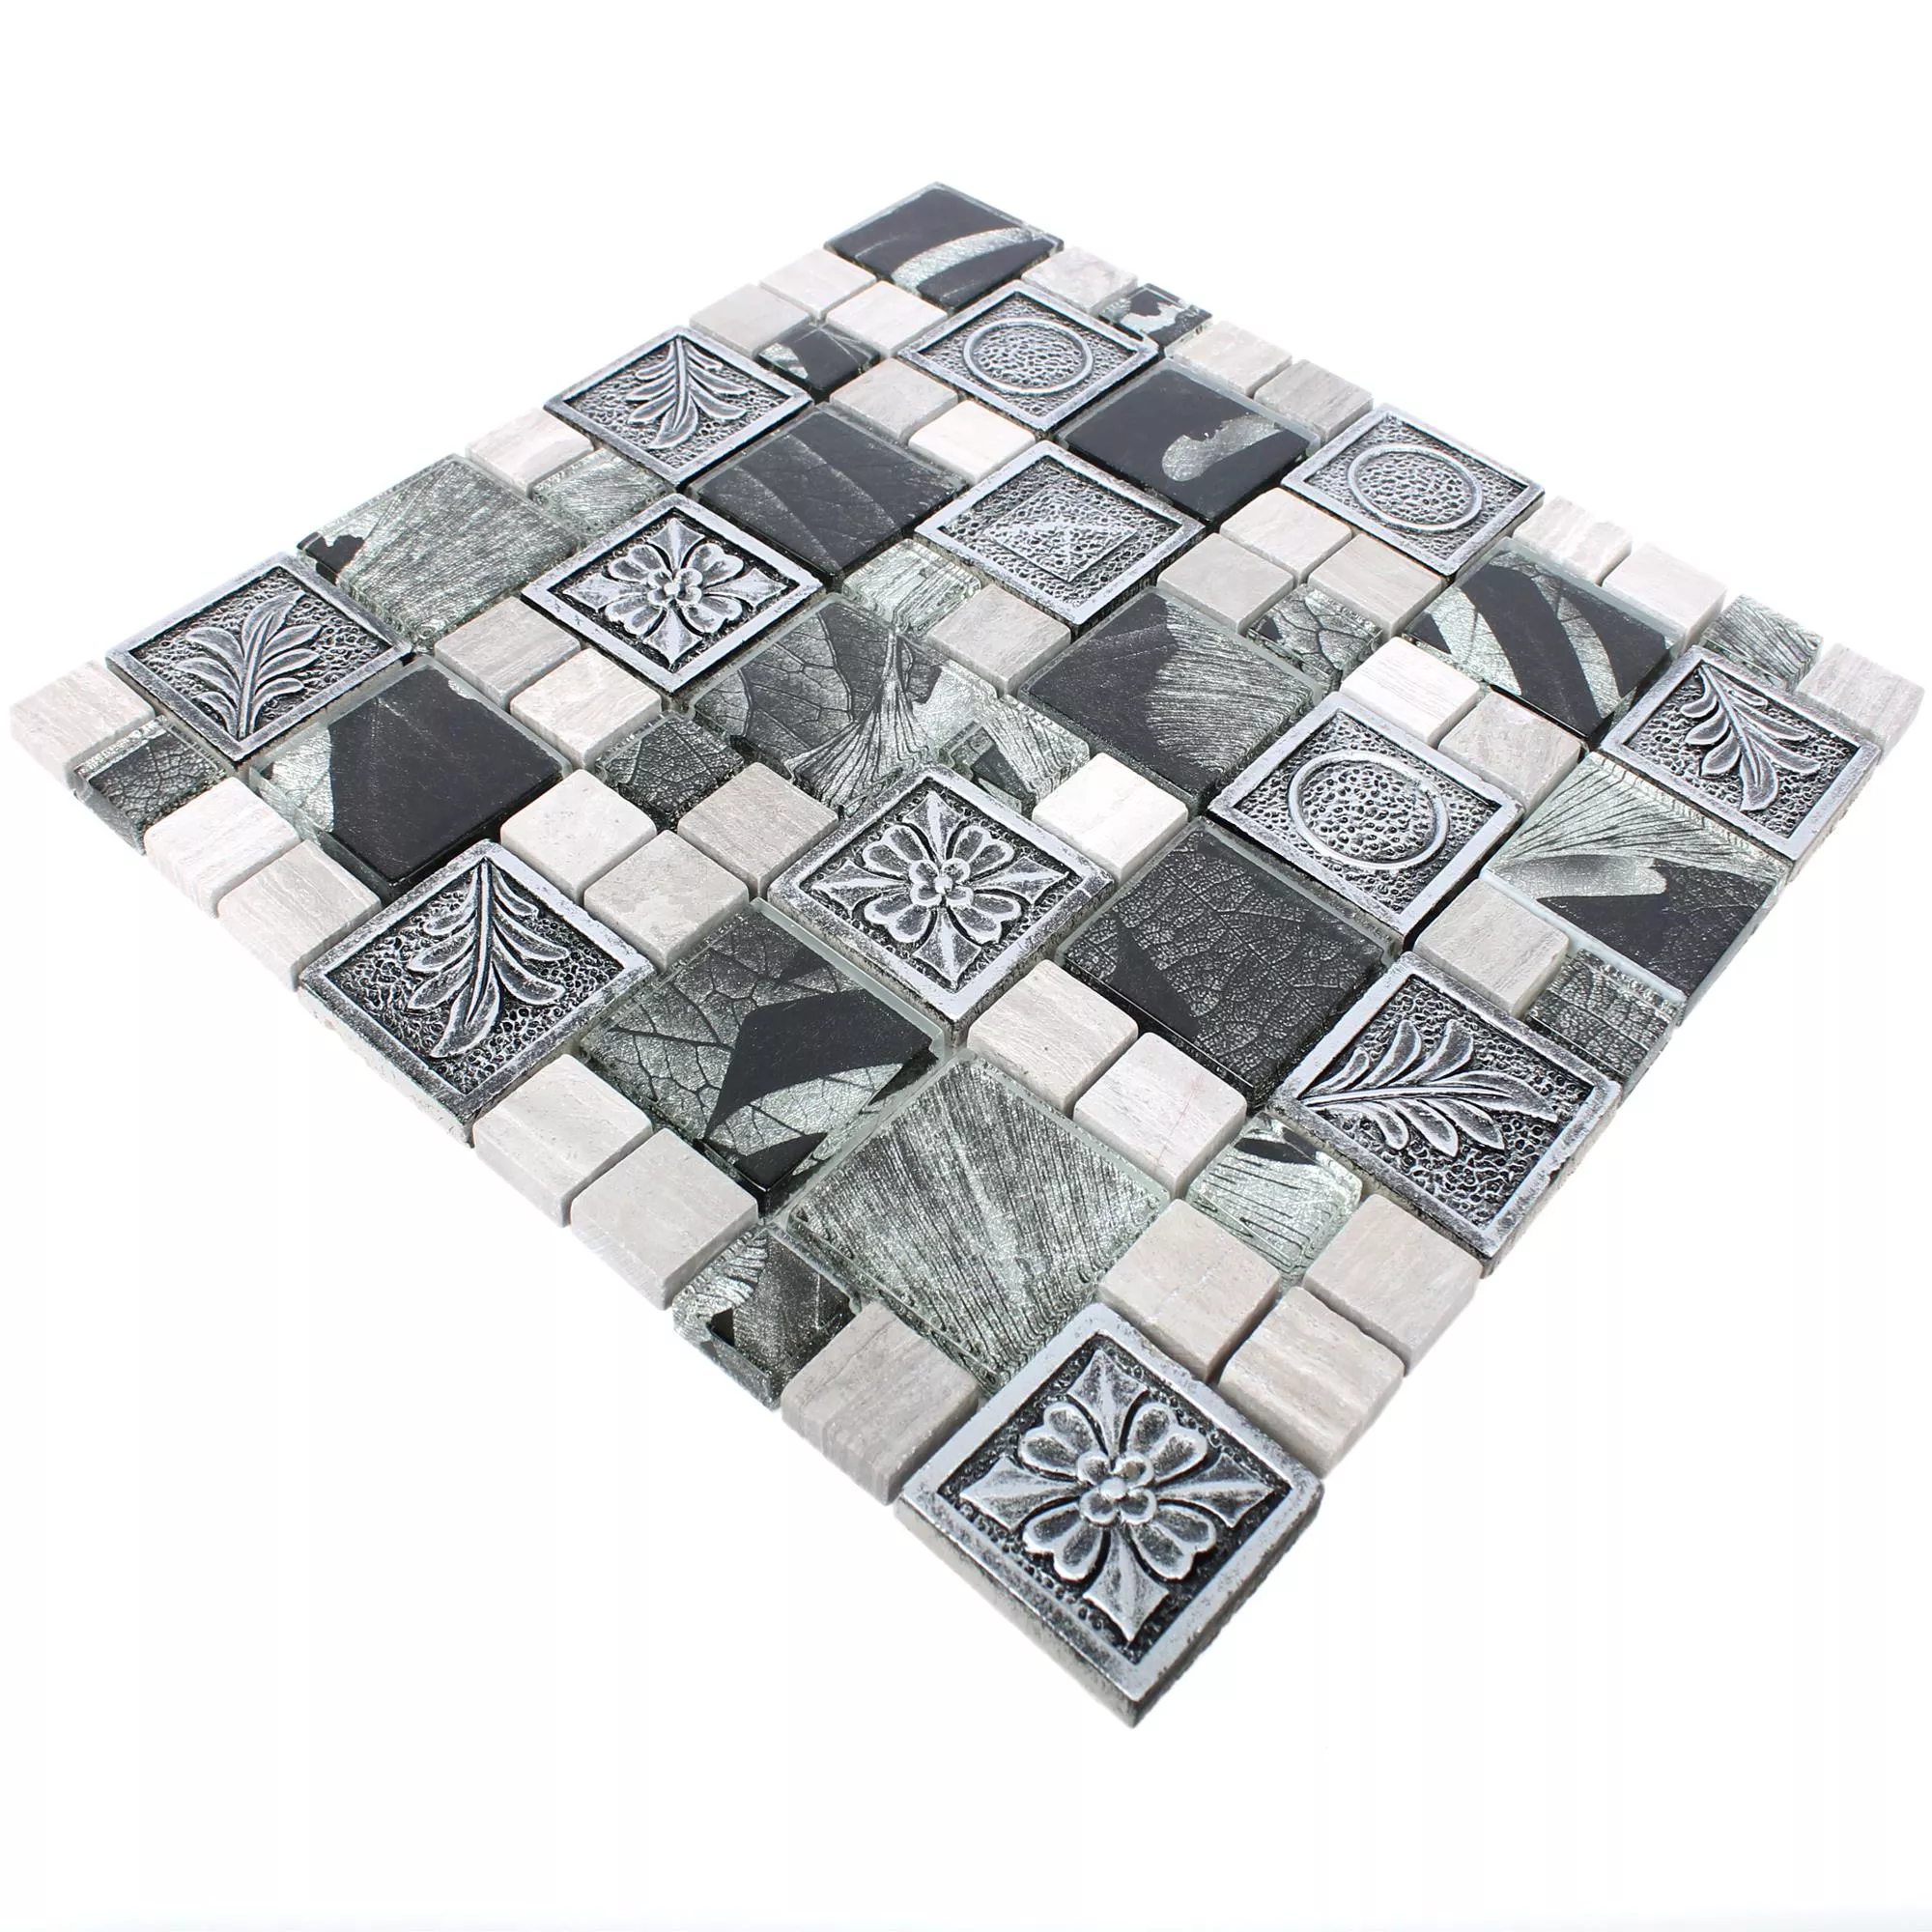 Mosaic Tiles Levanzo Glass Resin Ornament Mix Silver